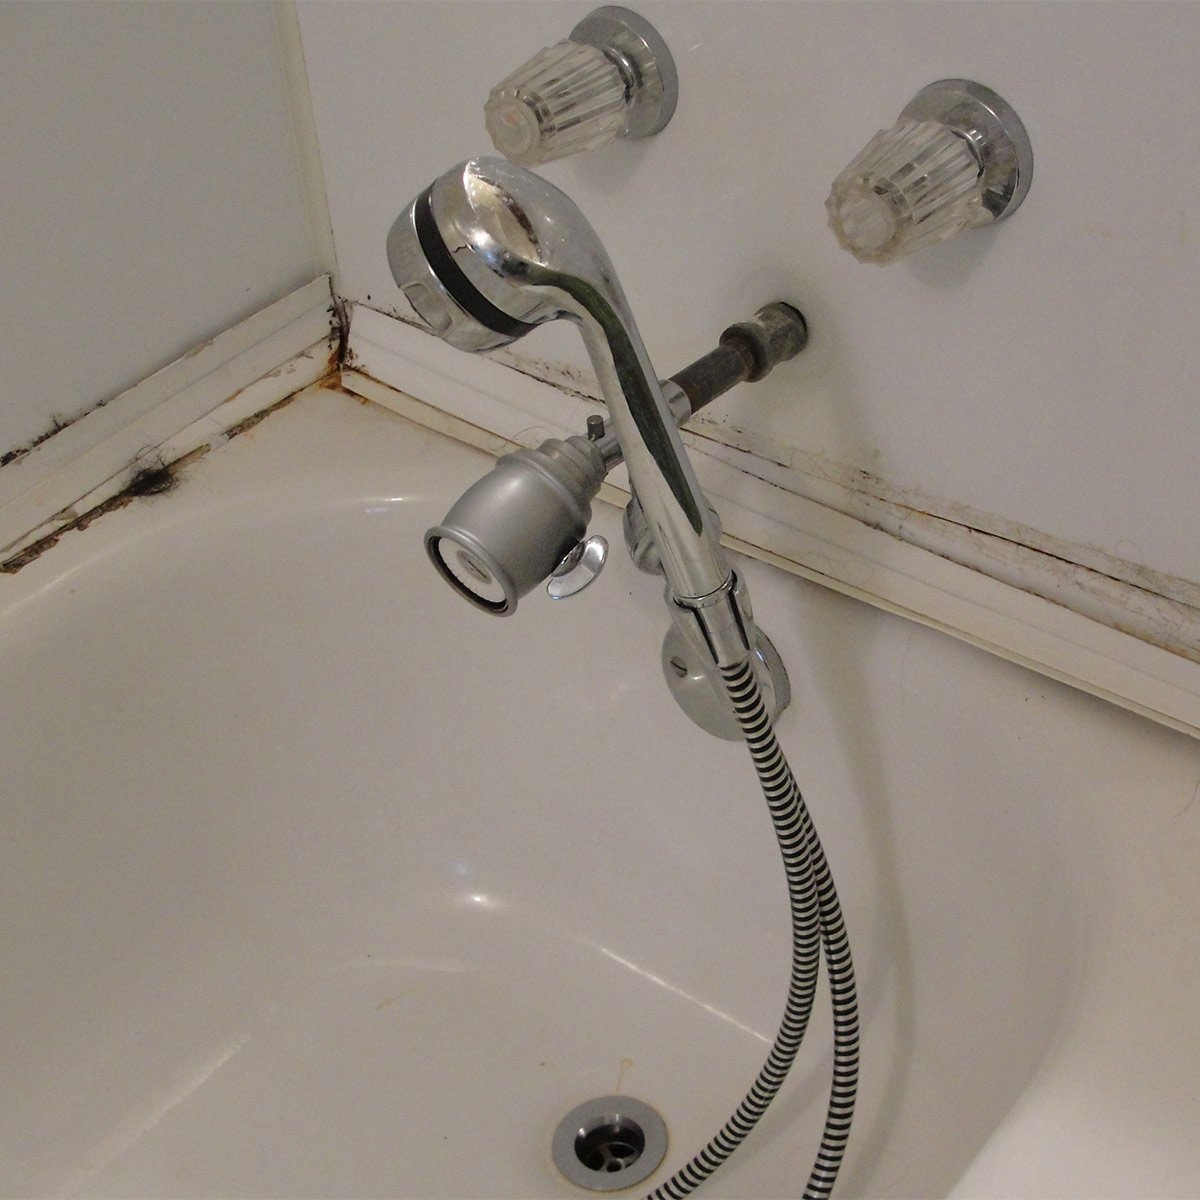 showerhead attached to tub faucet